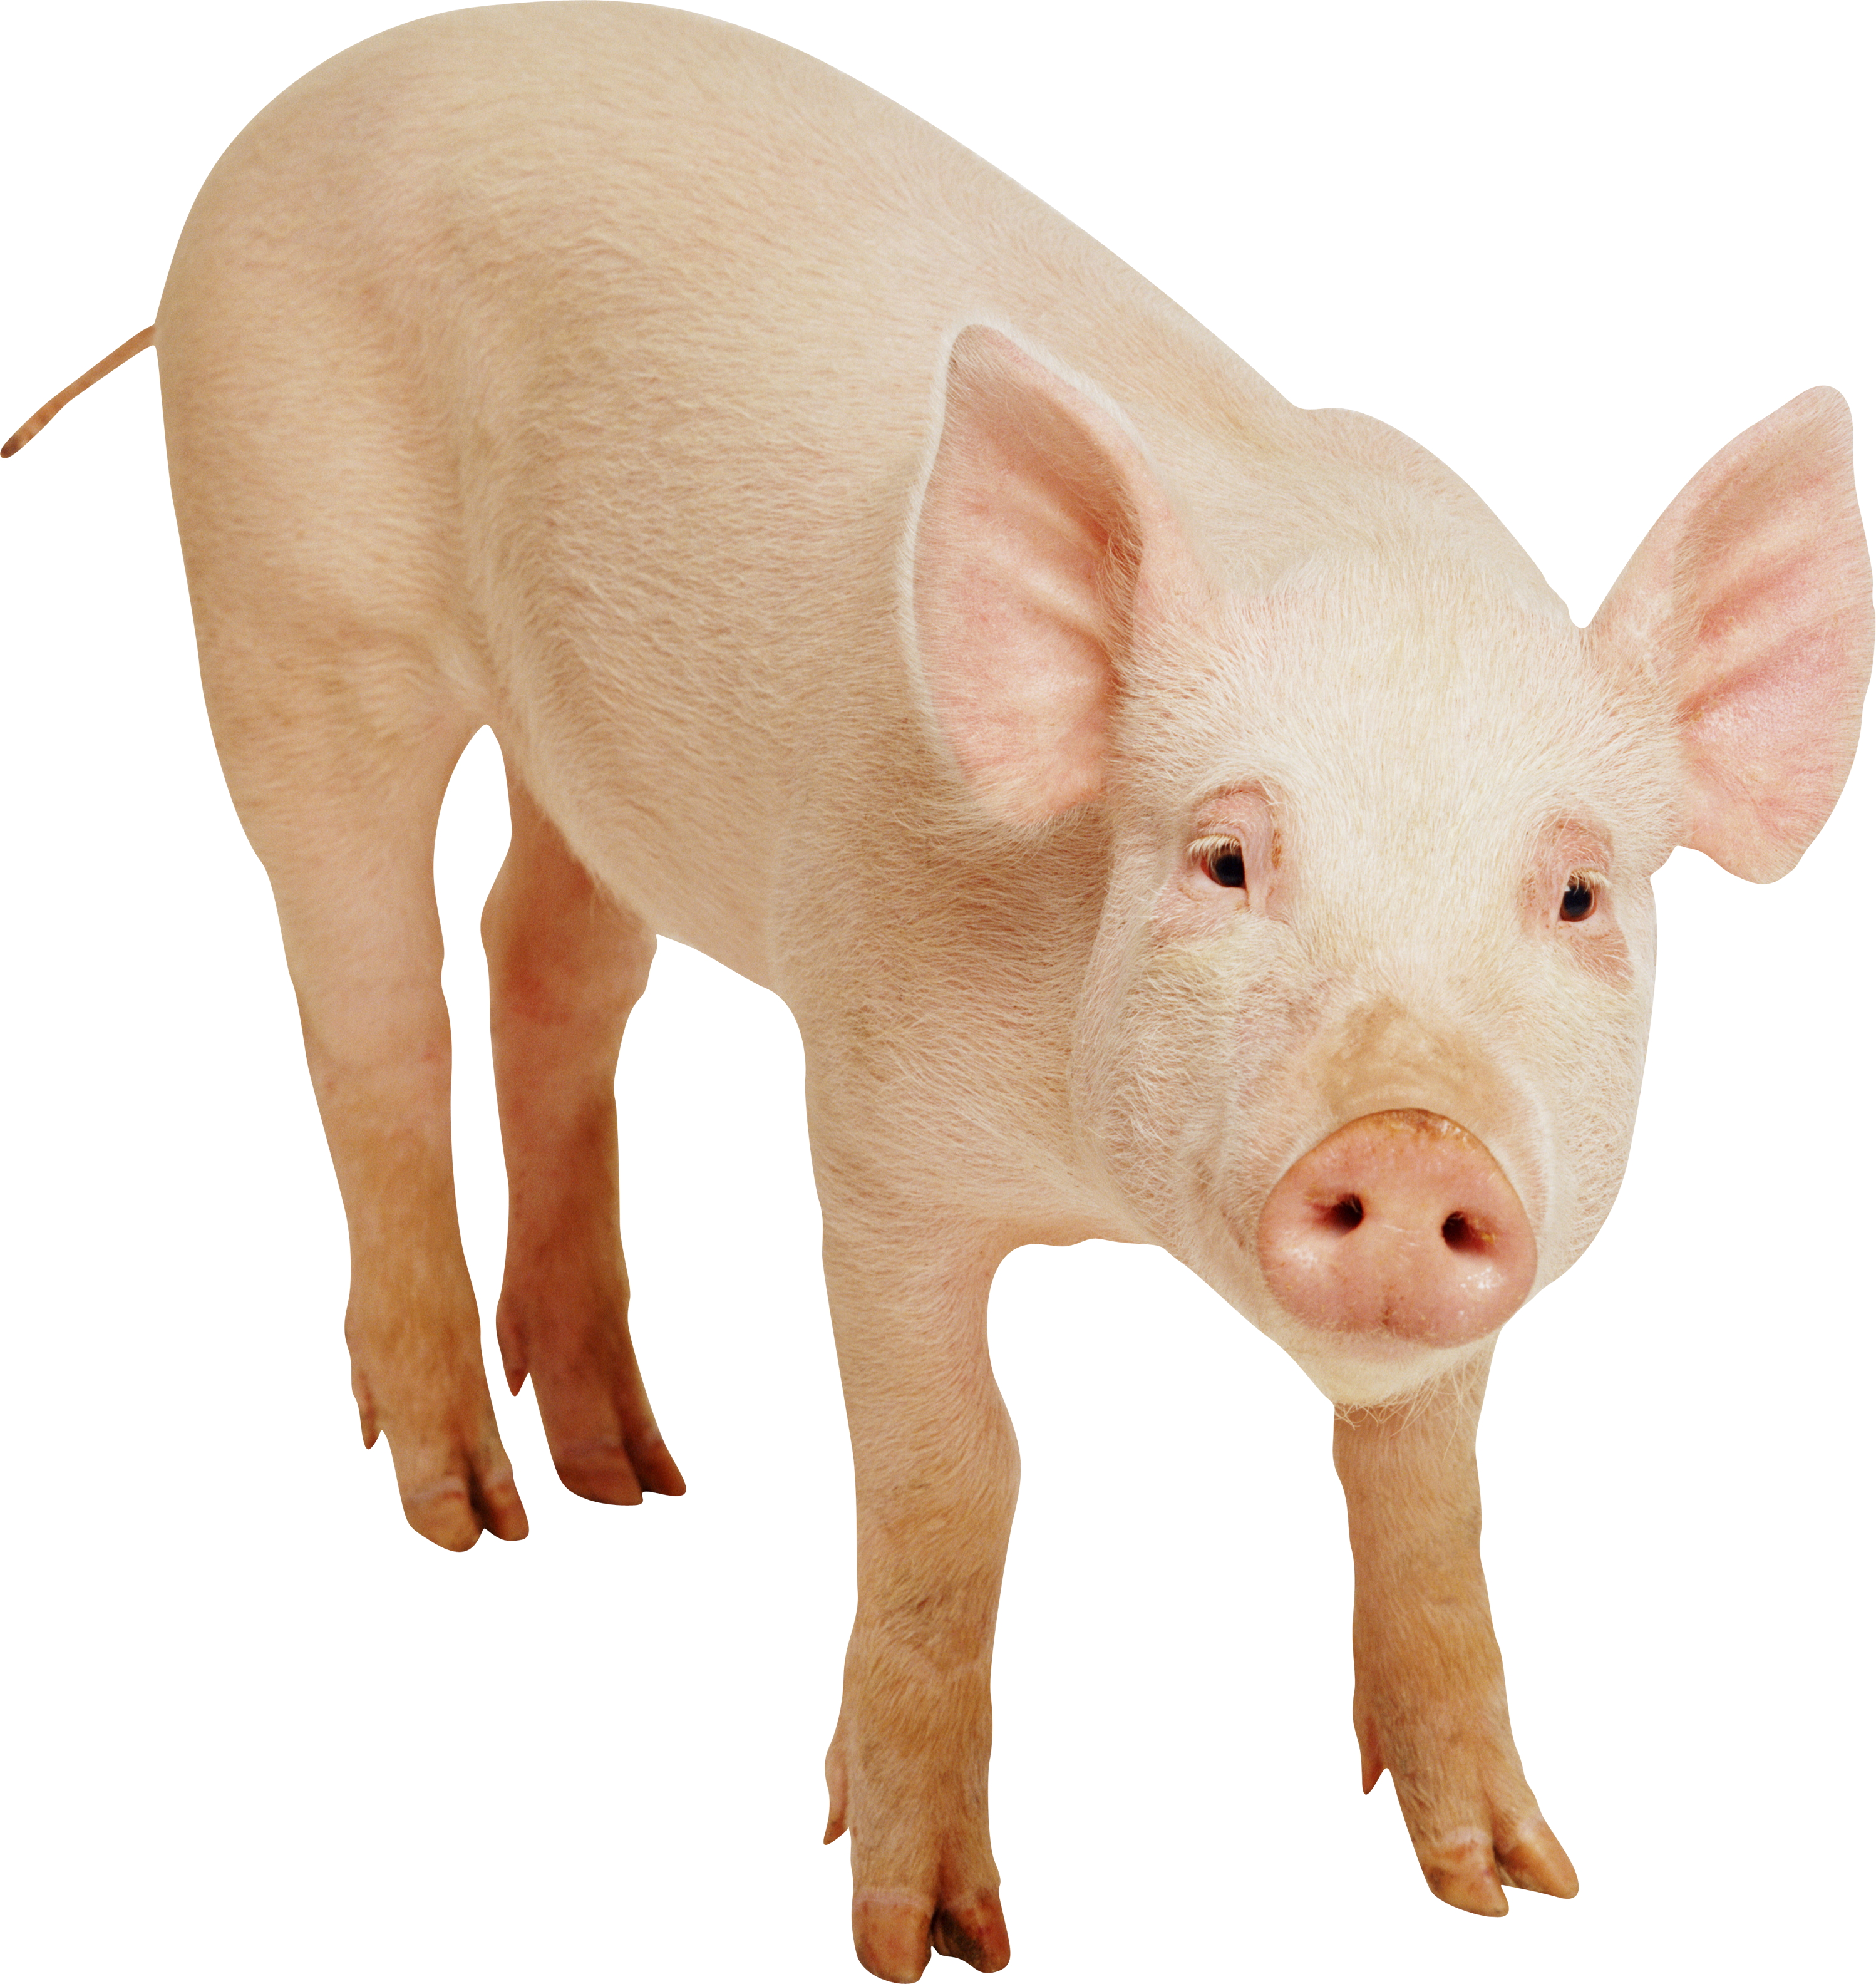 Pig Face PNG HD - 124009